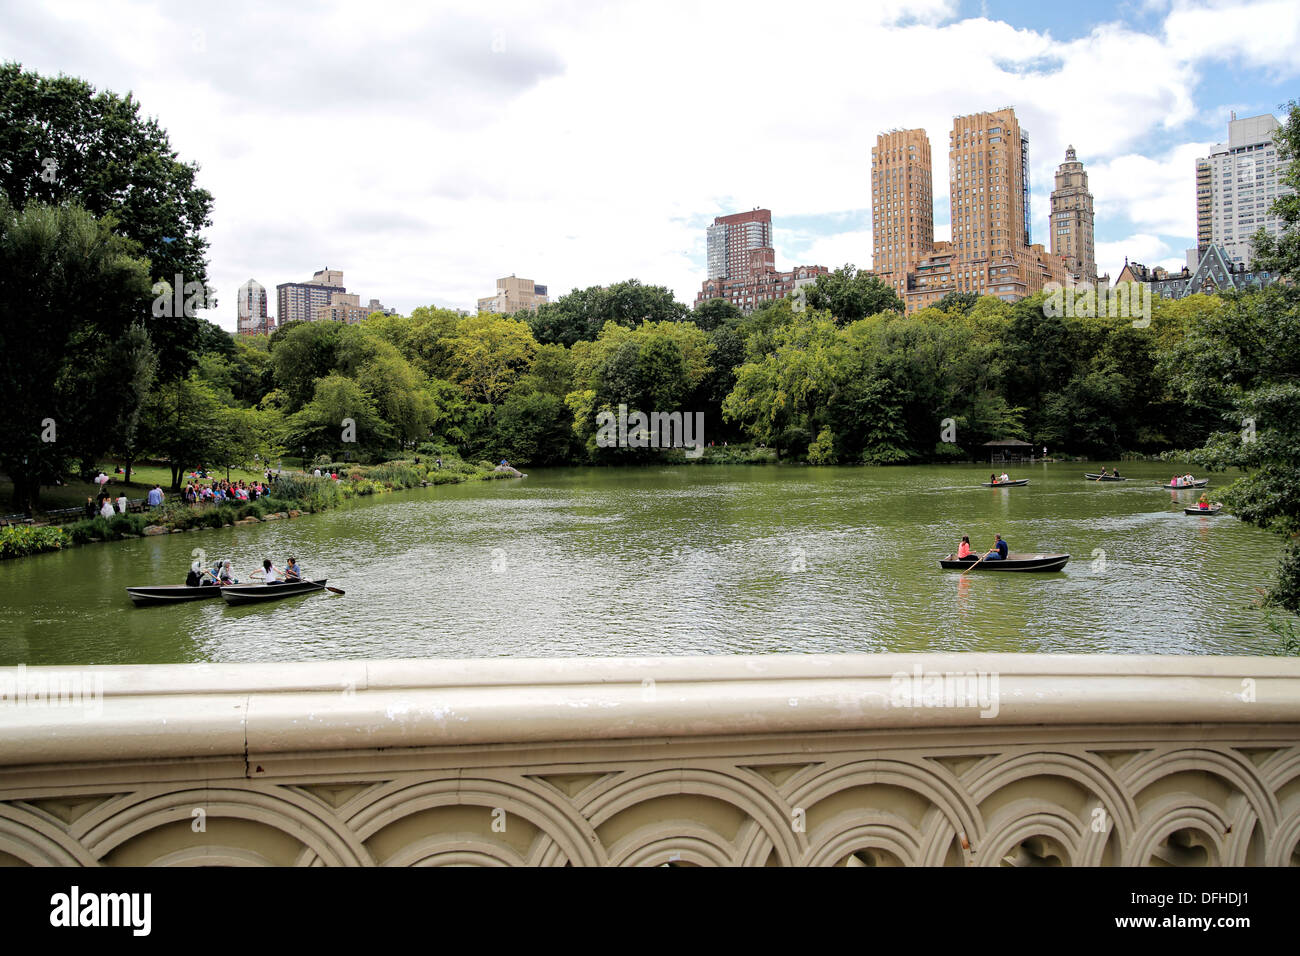 Looking at Central Park West, New York City, From Bow Bridge in Central Park. Stock Photo